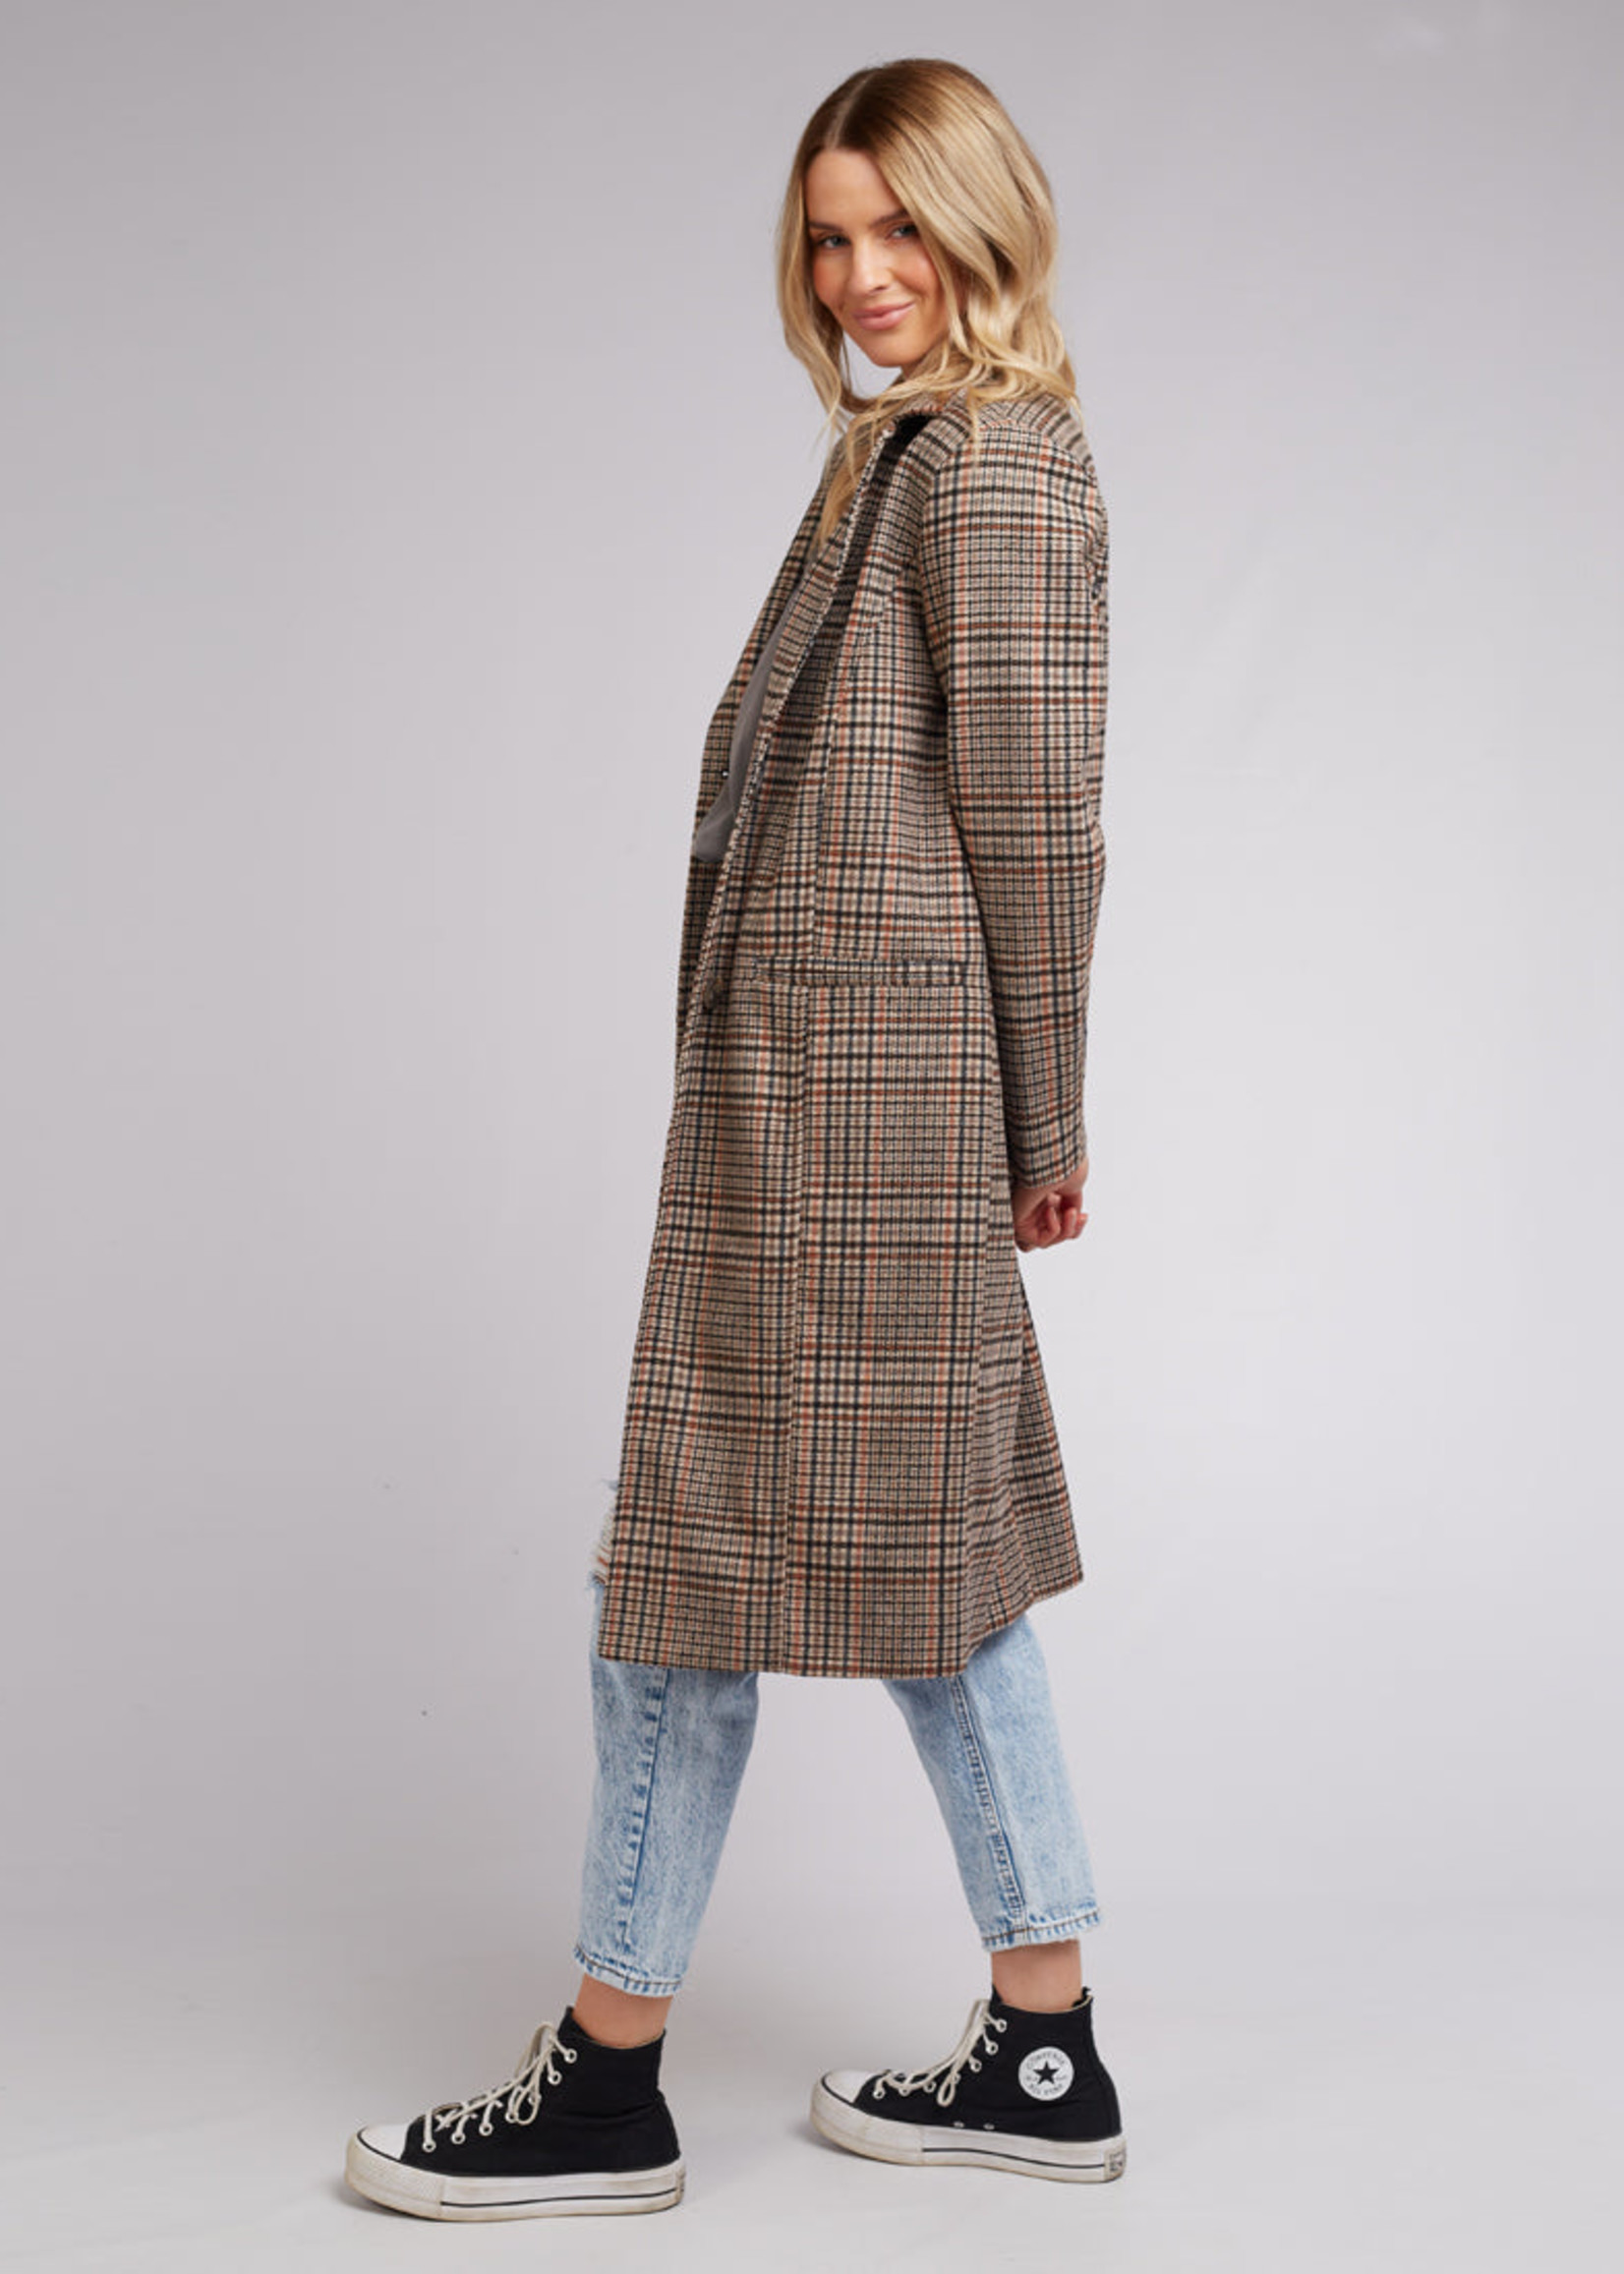 All About Eve Drew Check Coat